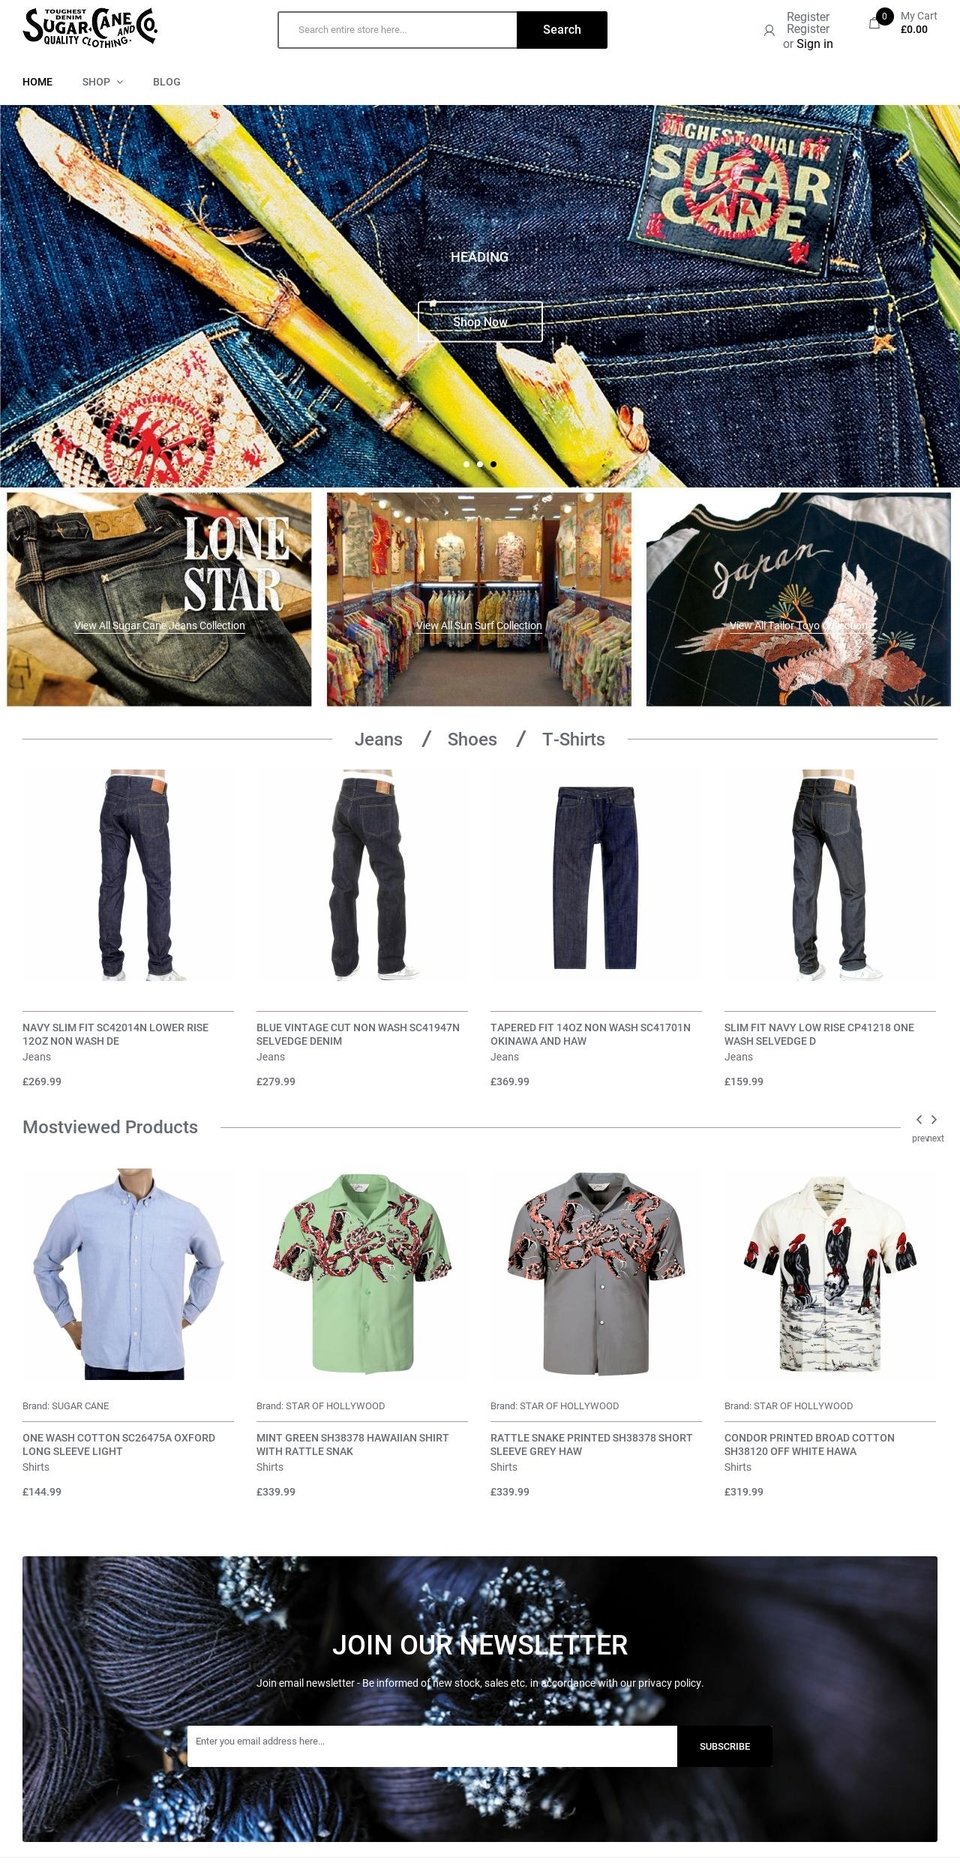 Sneaker Shopify theme site example sugarcanejeans.com